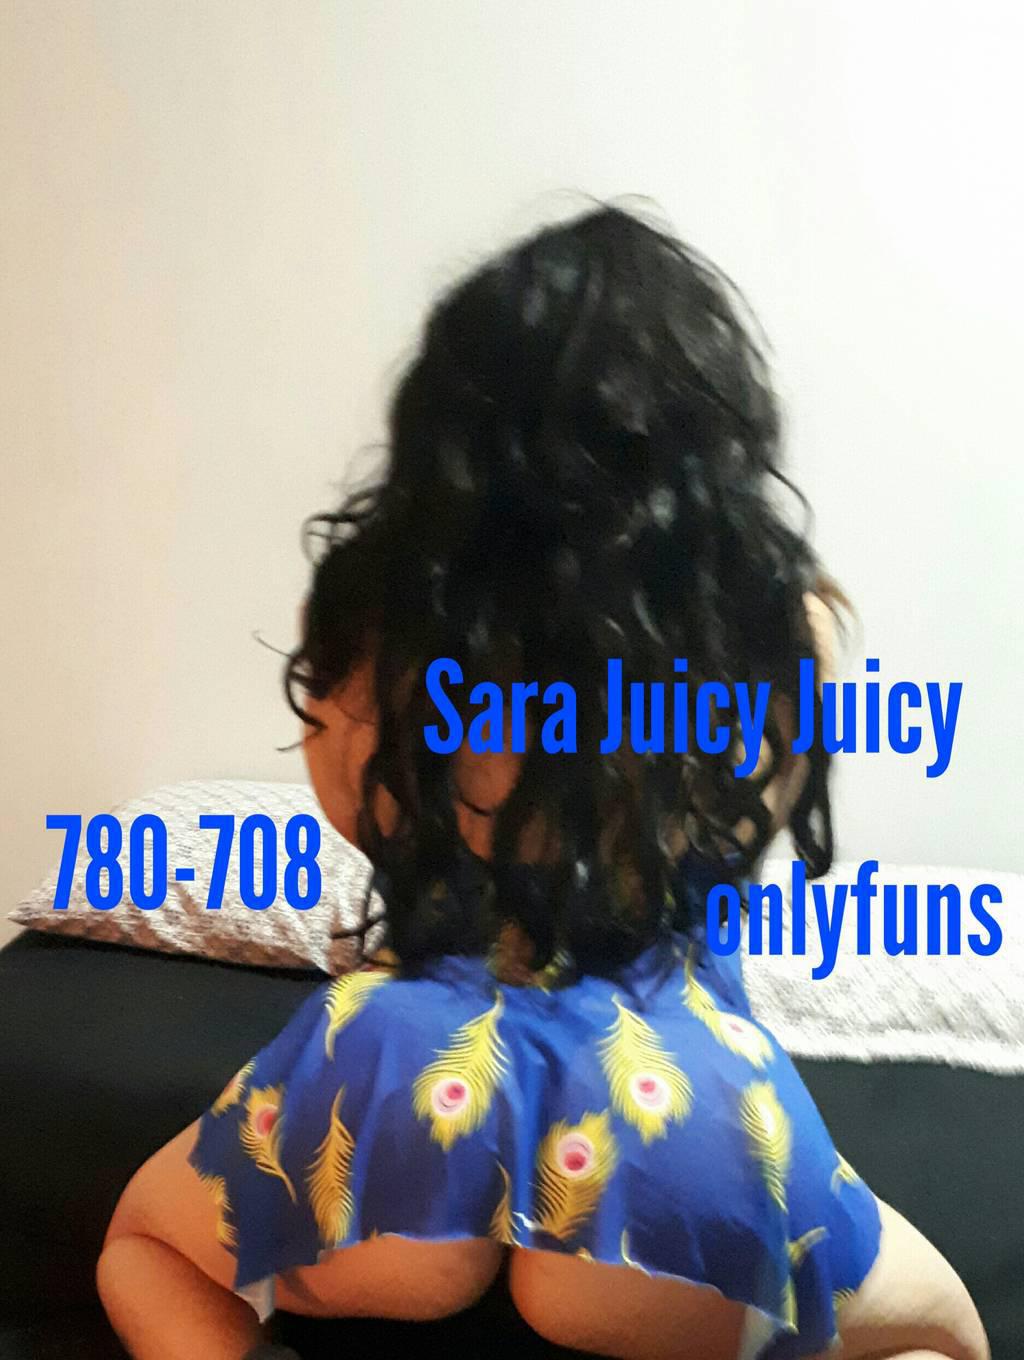 juicy juicy latina online fun small BBW watch me play with